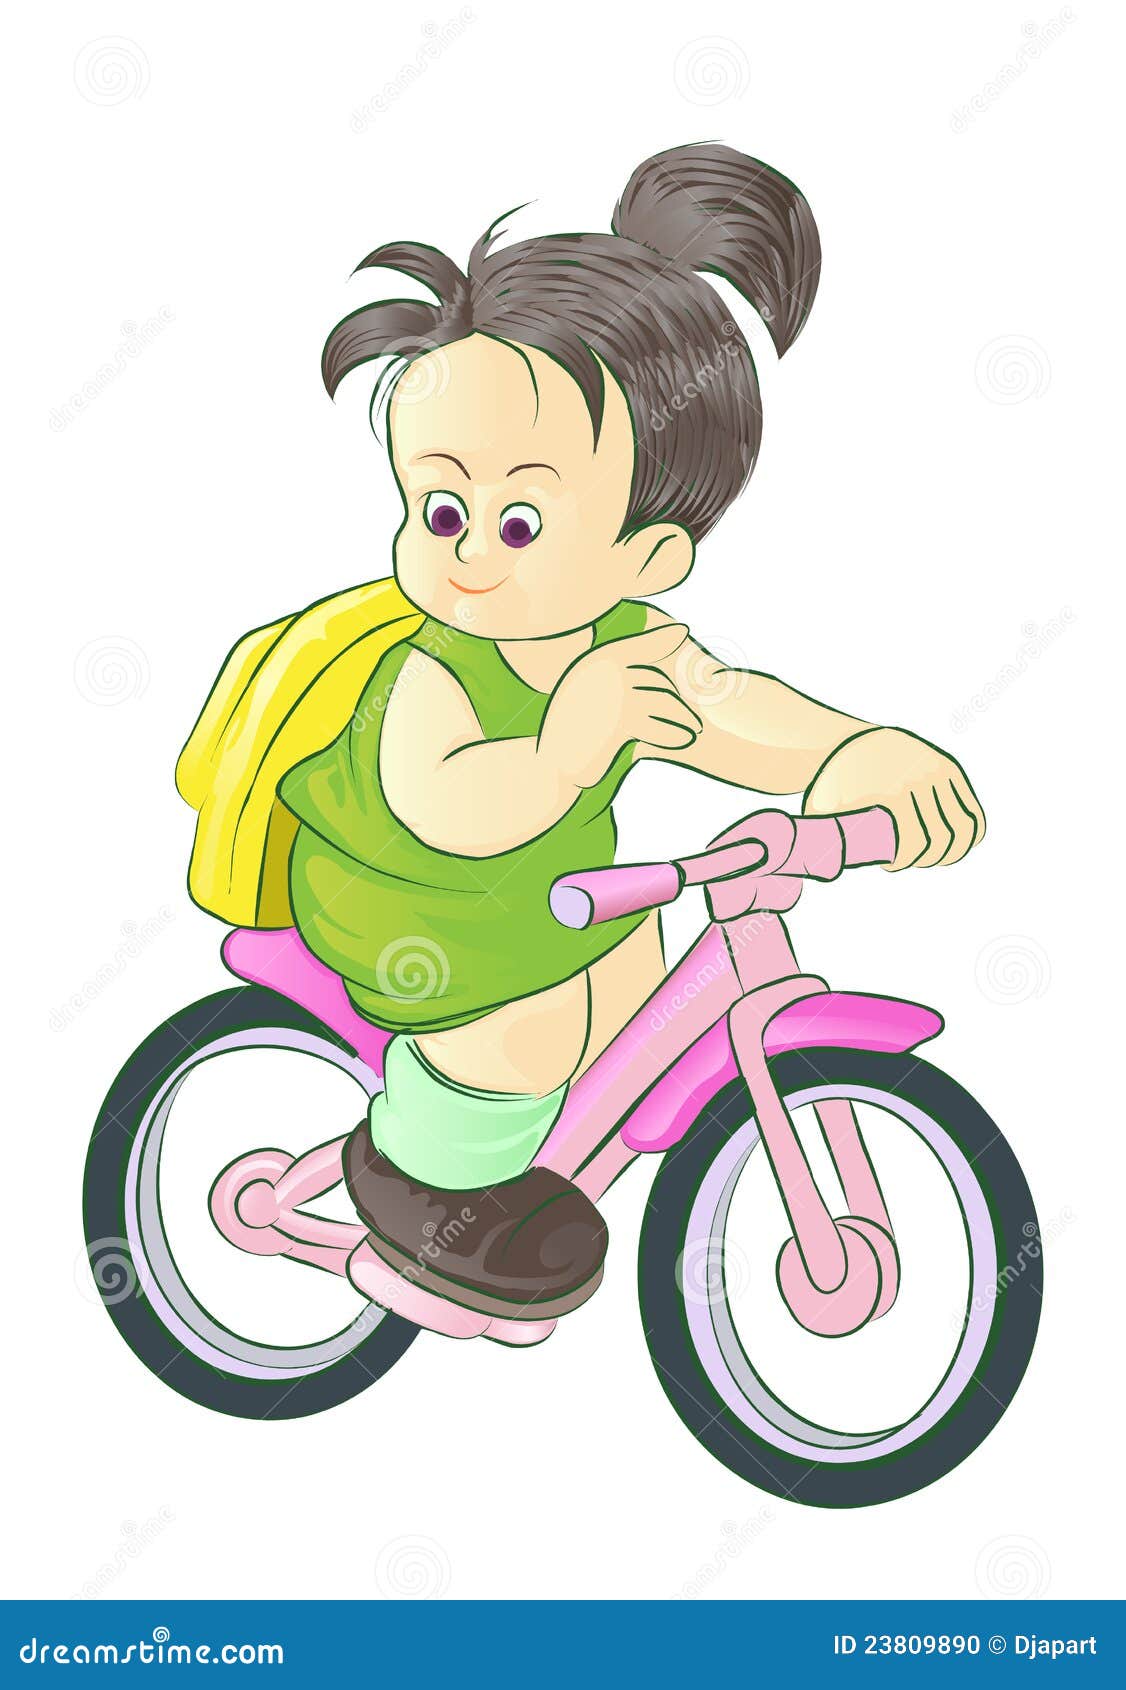 clipart girl riding bicycle - photo #47